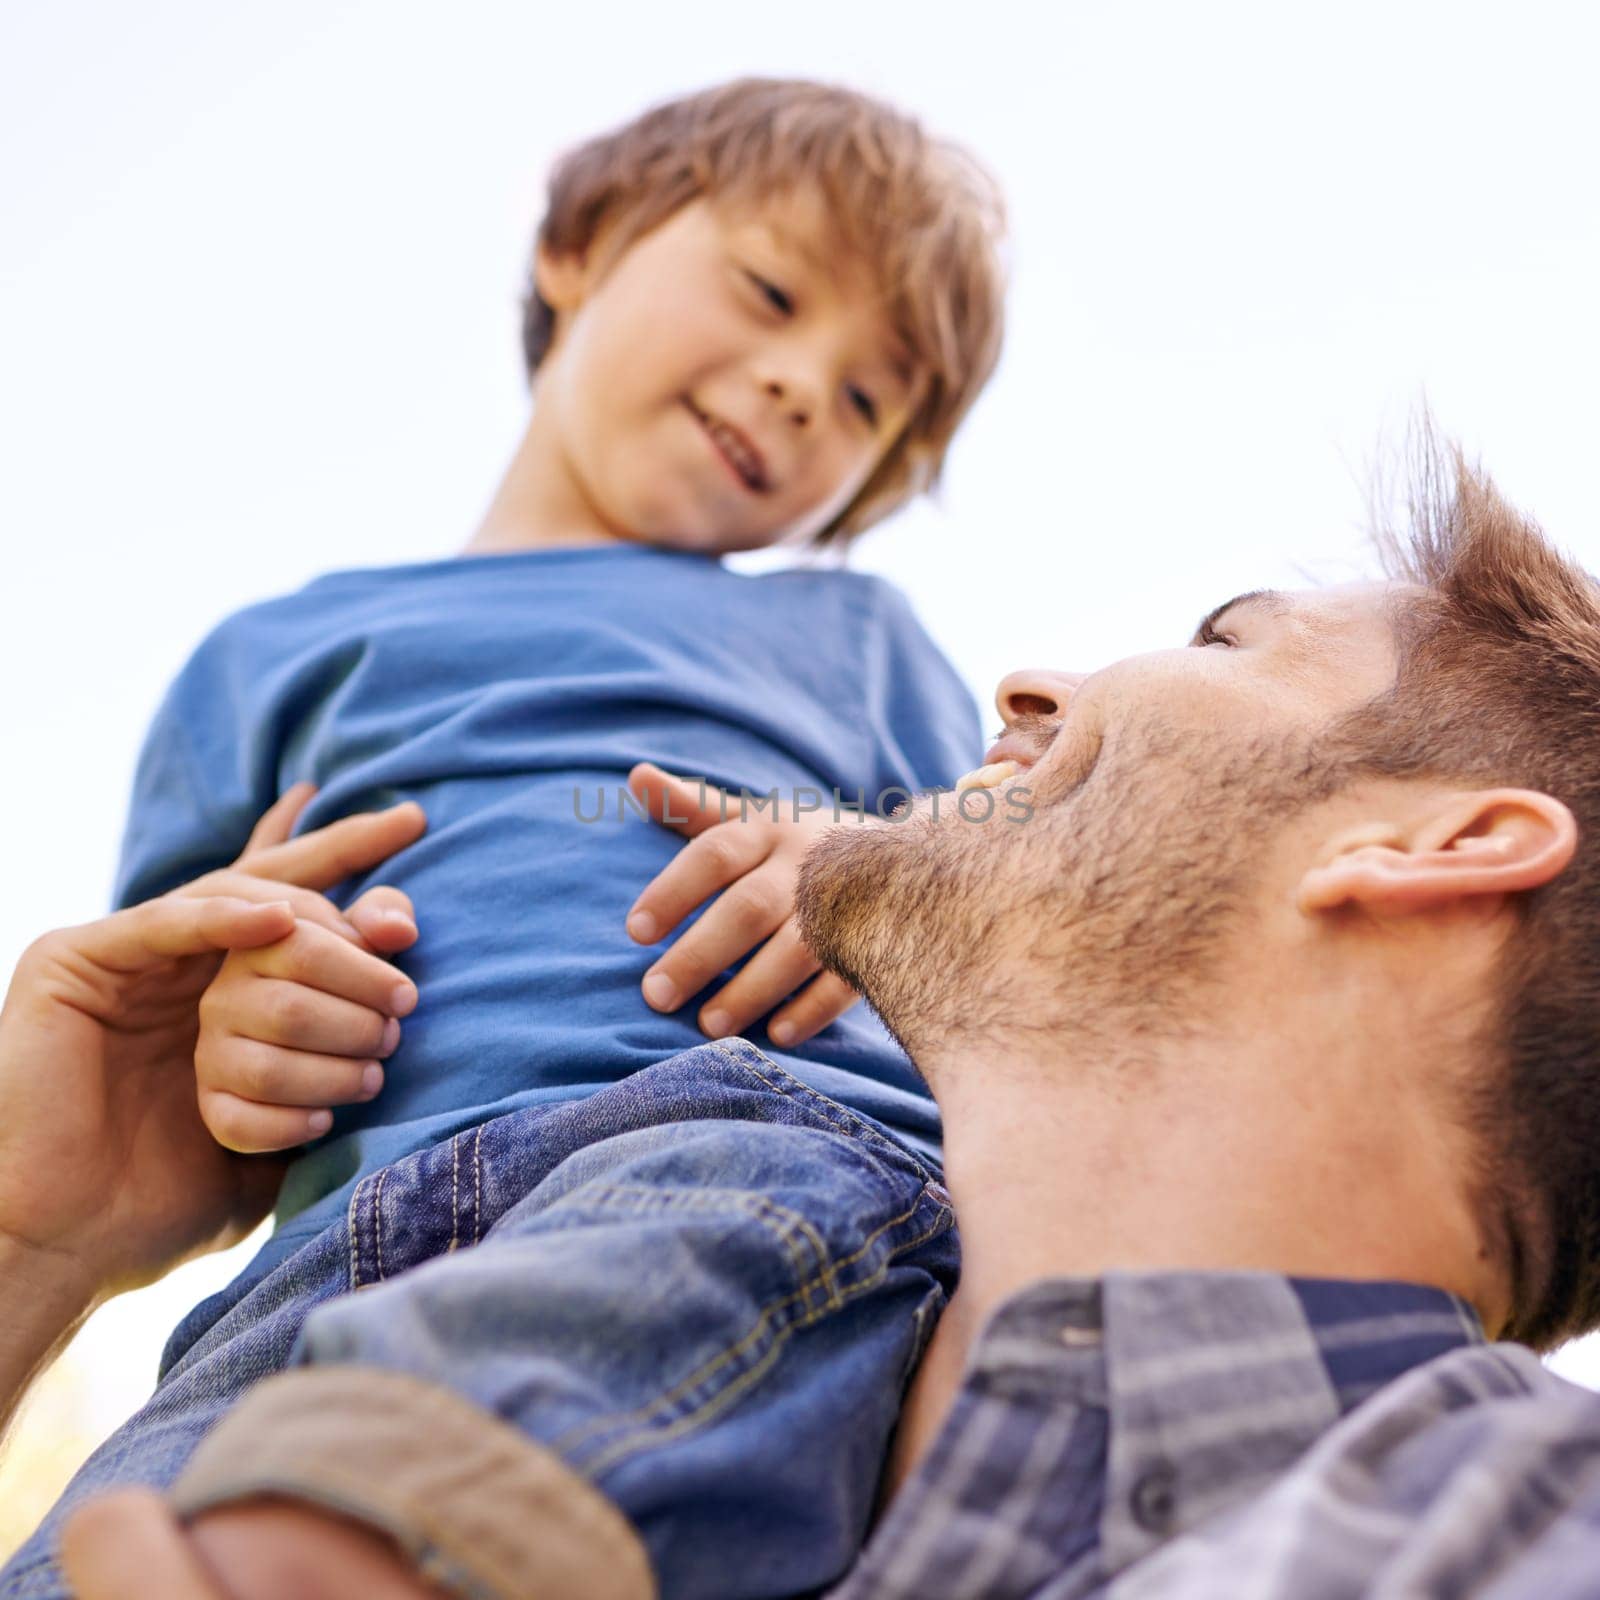 Family, smile and son on shoulder of father closeup outdoor for love, bonding or fun together. Face, happy or relax with man parent and boy child on sky from below for summer vacation or holiday.